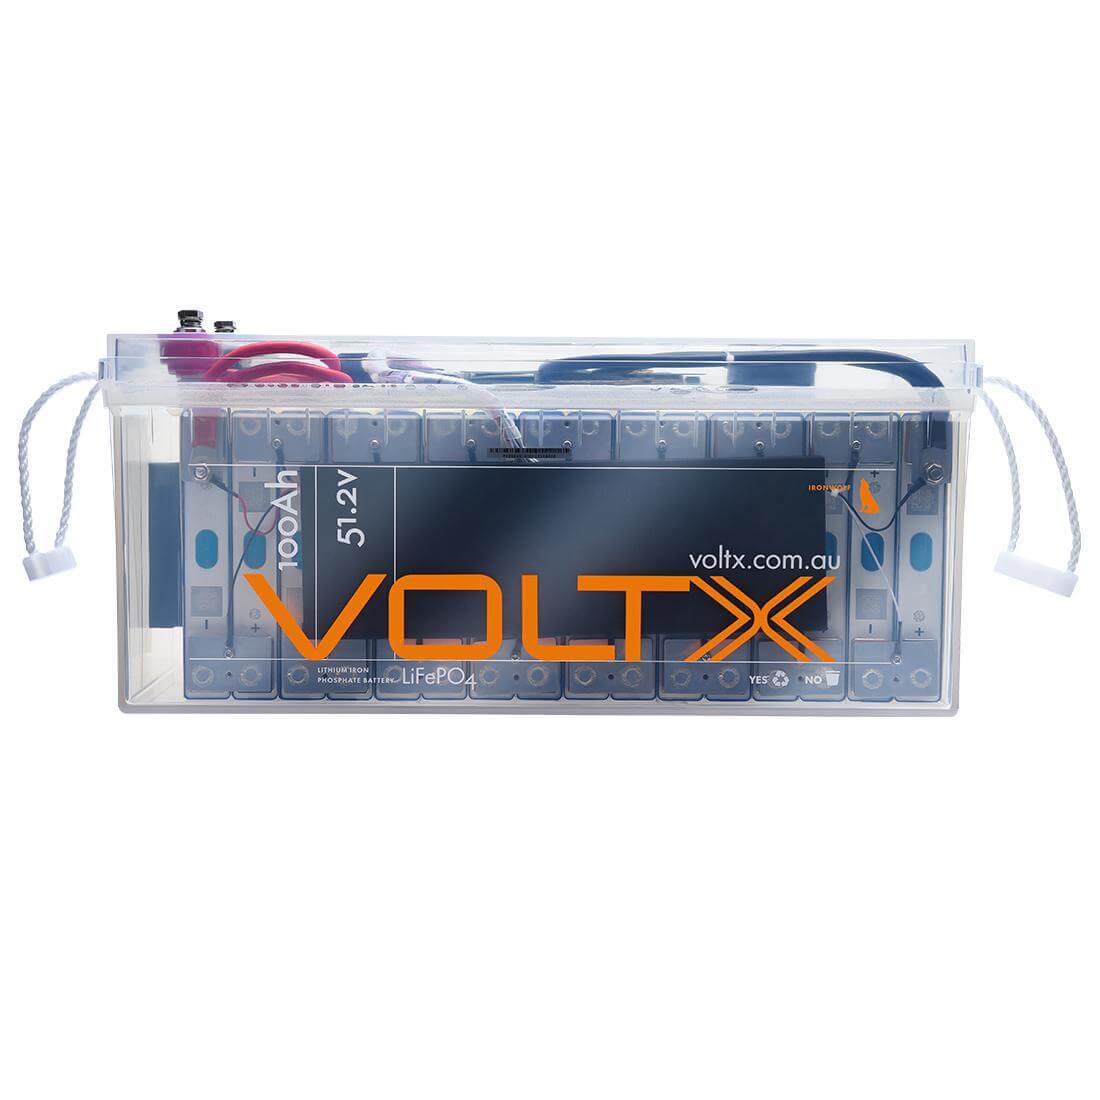 VOLTX 48V 100AH LITHIUM ION PREMIUM LIFEPO4 BATTERY - WITH BUILT-IN POWER VOLTAGE DISPLAY